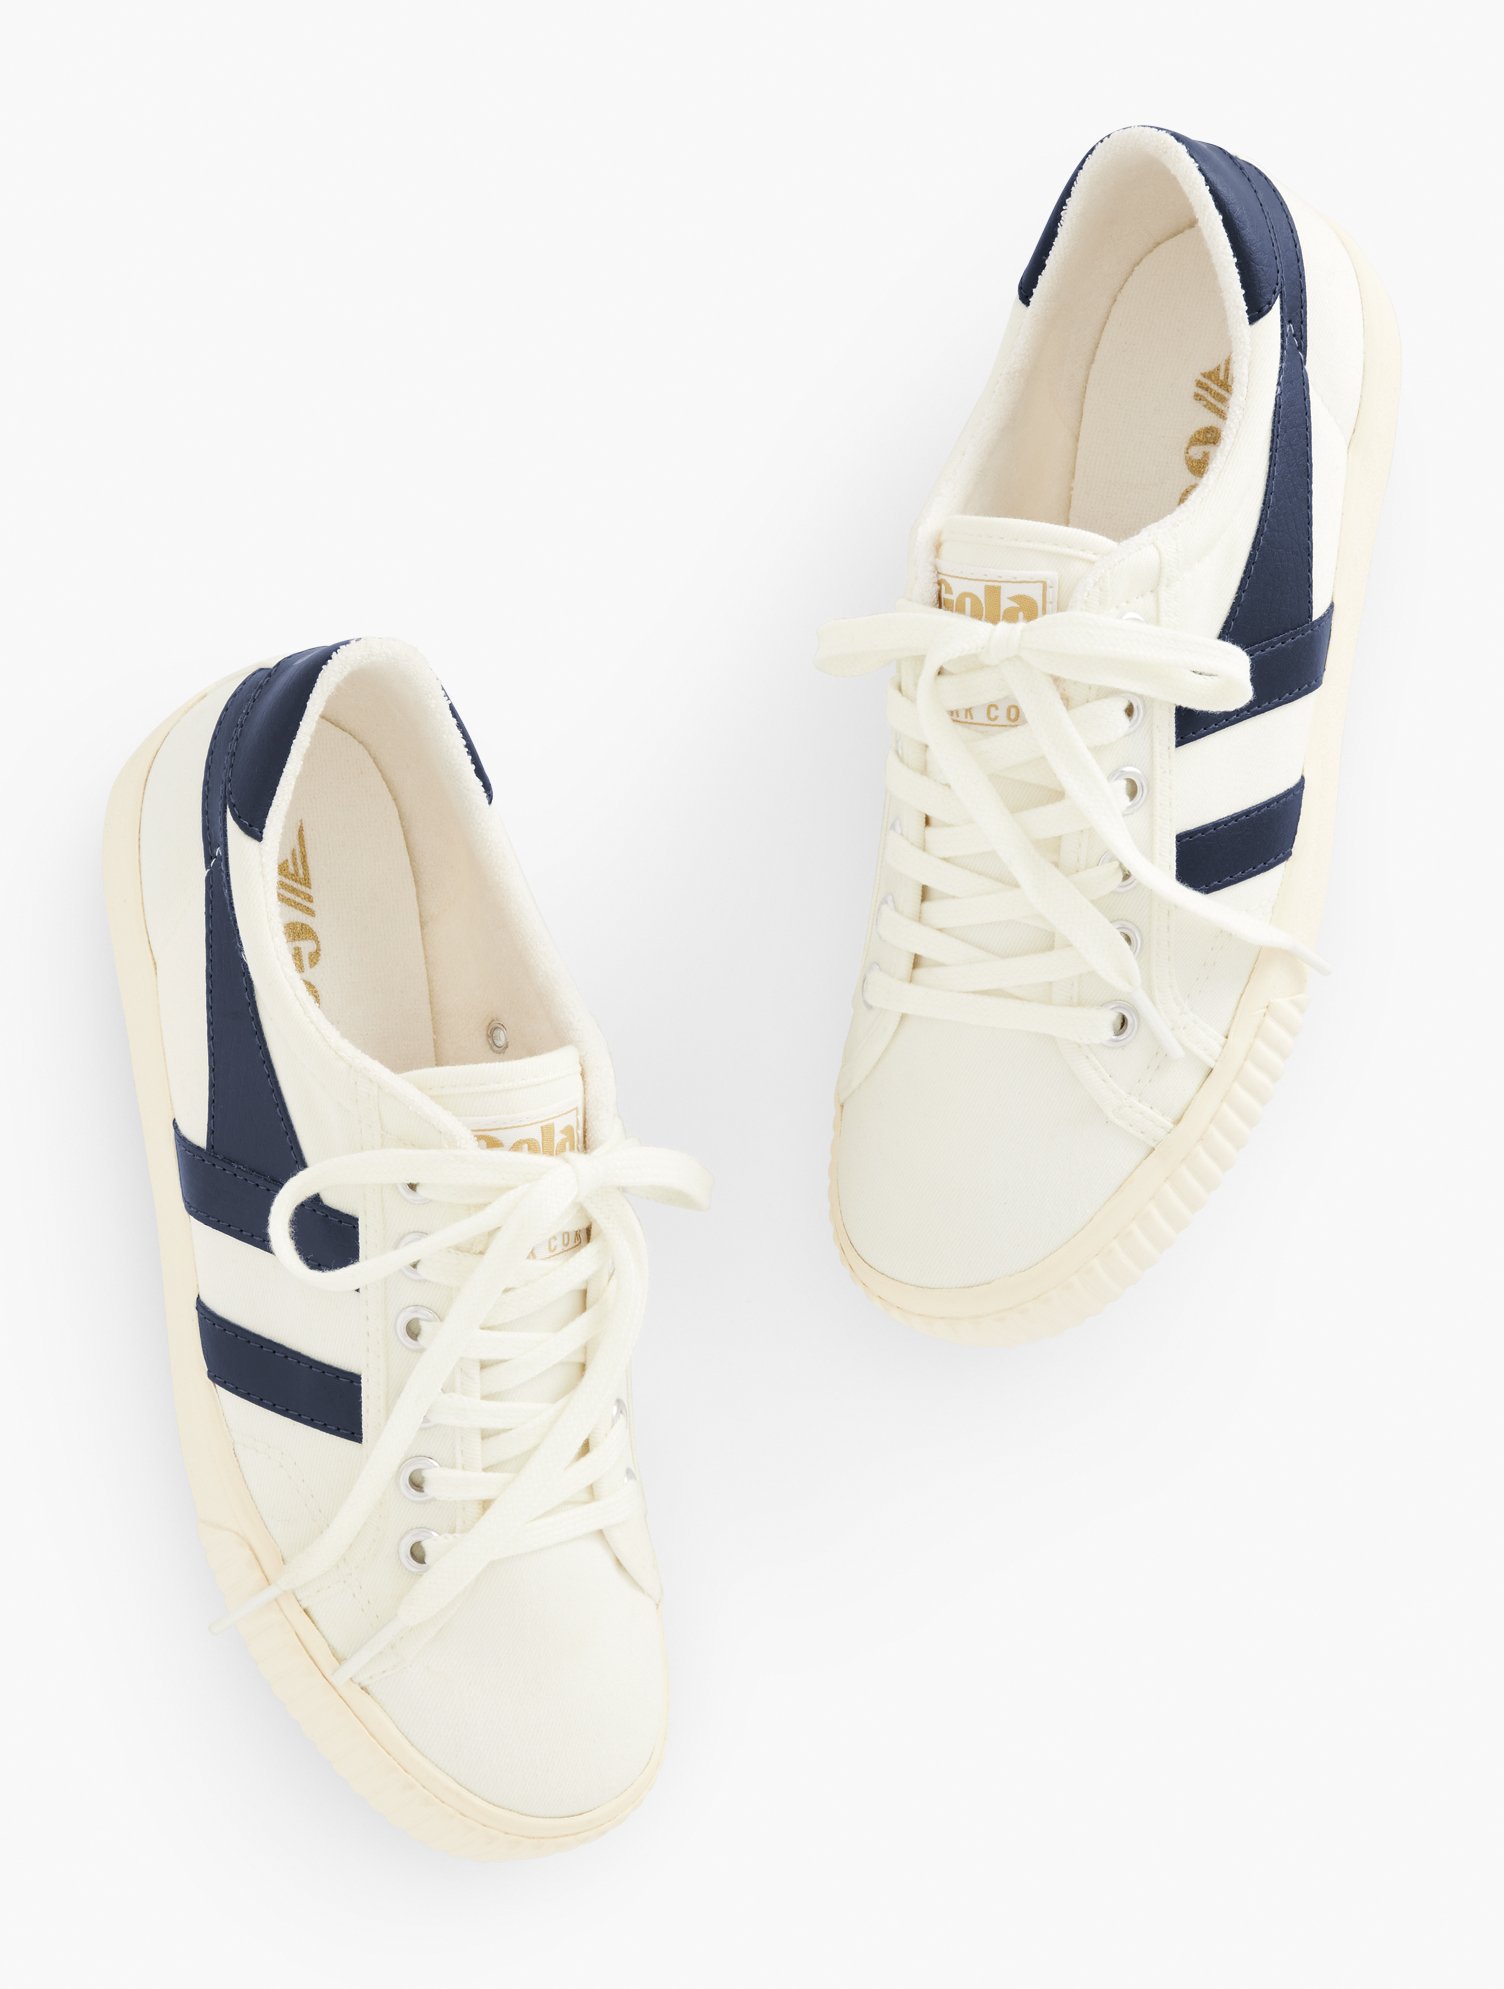 Talbots Golaâ® Mark Cox Tennis Sneakers - Off White/navy Blue - 6 1/2 M - 100% Cotton  In Off White,navy Blue